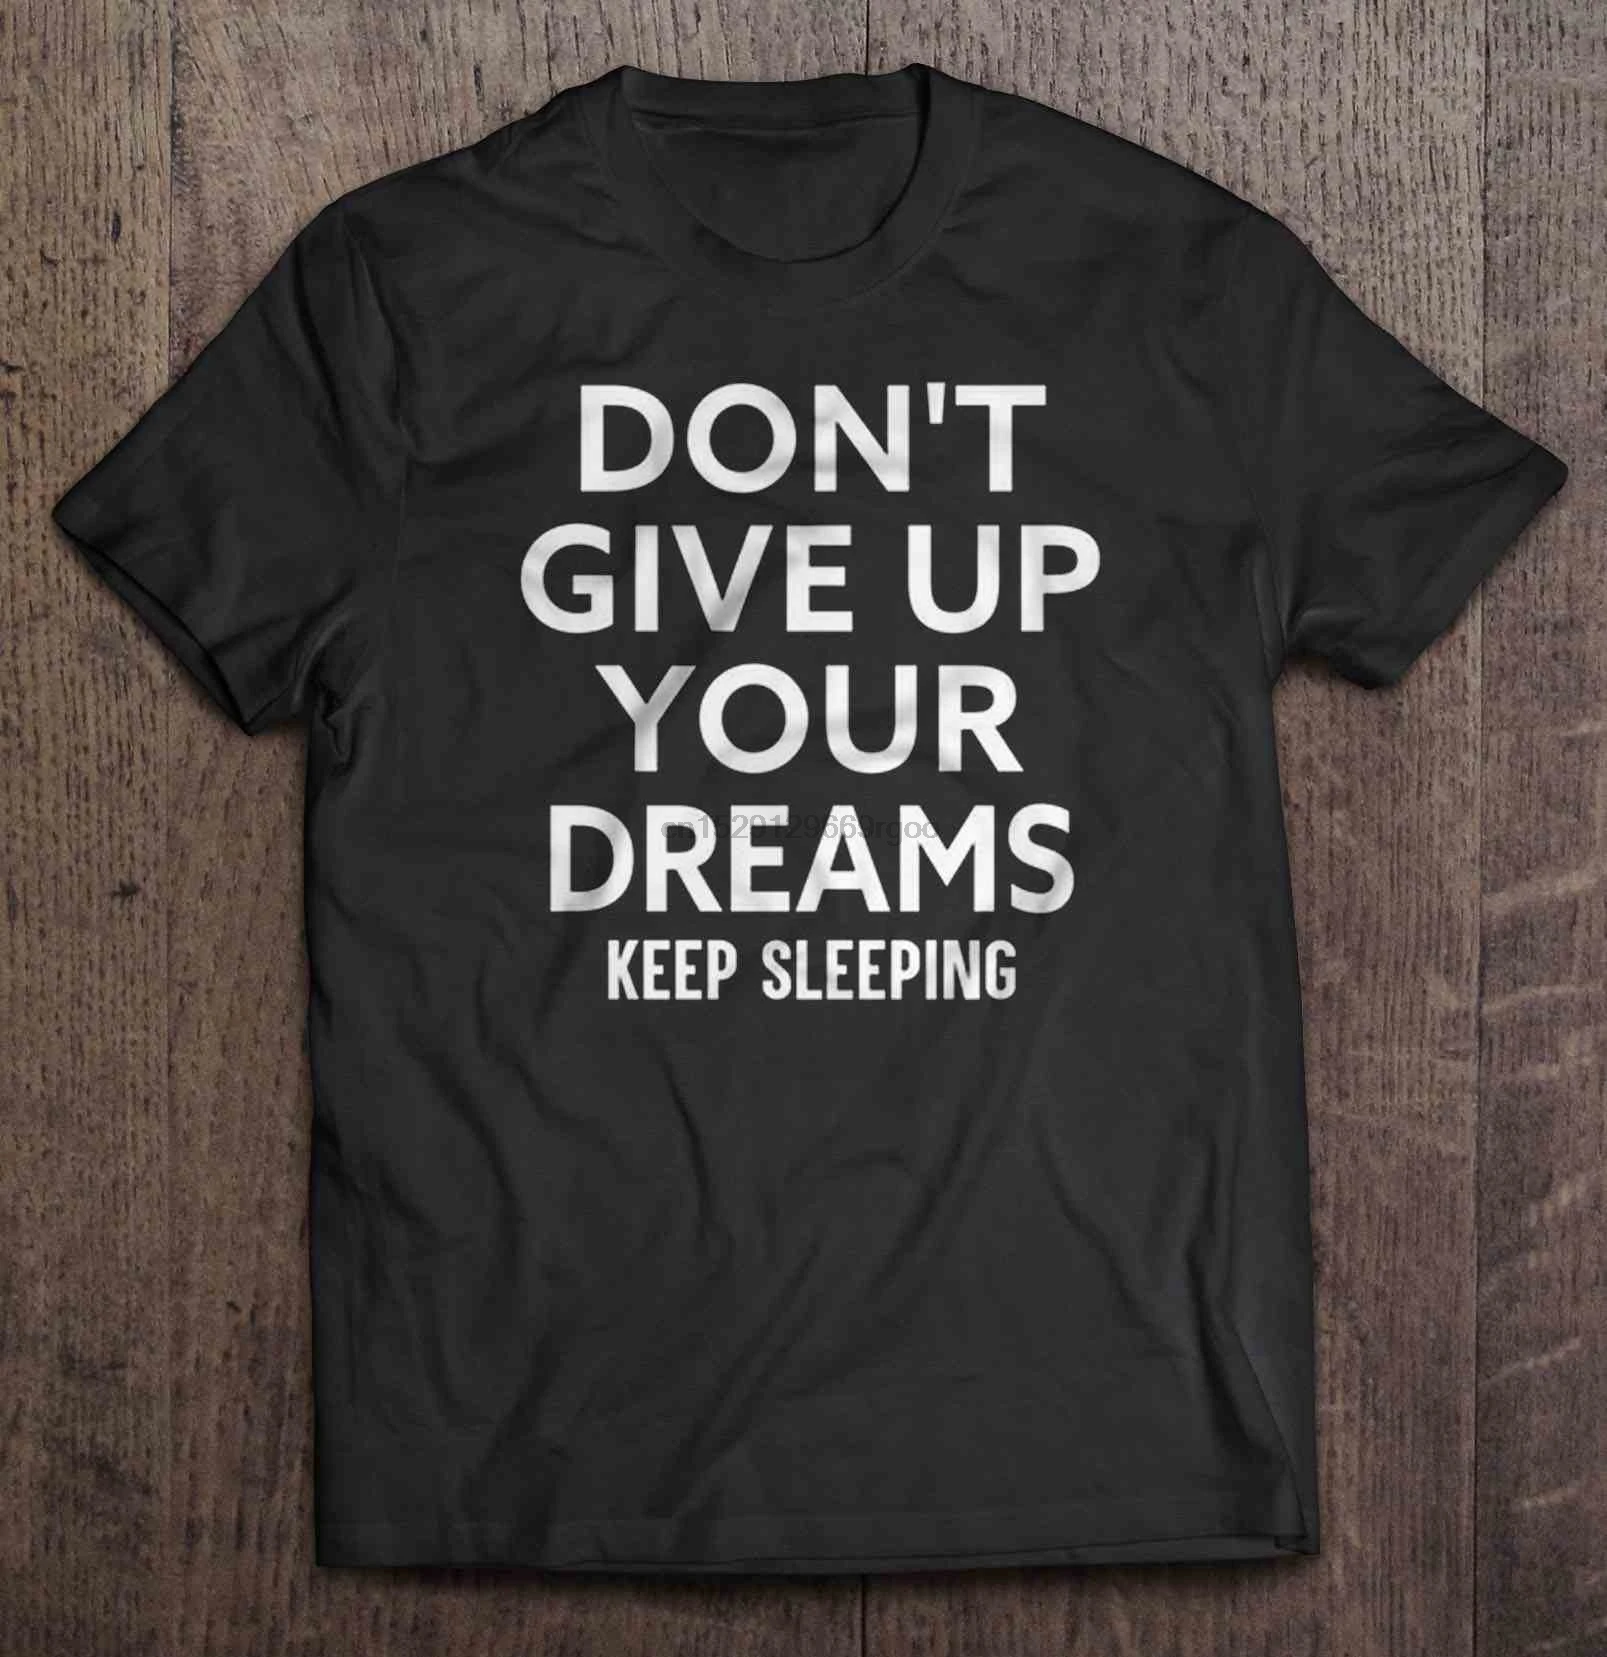 Keep asleep. Футболка don't give up. Футболка don't give up фиолетовая. Don't give up on your Dreams. Keep sleeping.. Don't give up on your Dreams. Keep sleeping. Перевод.